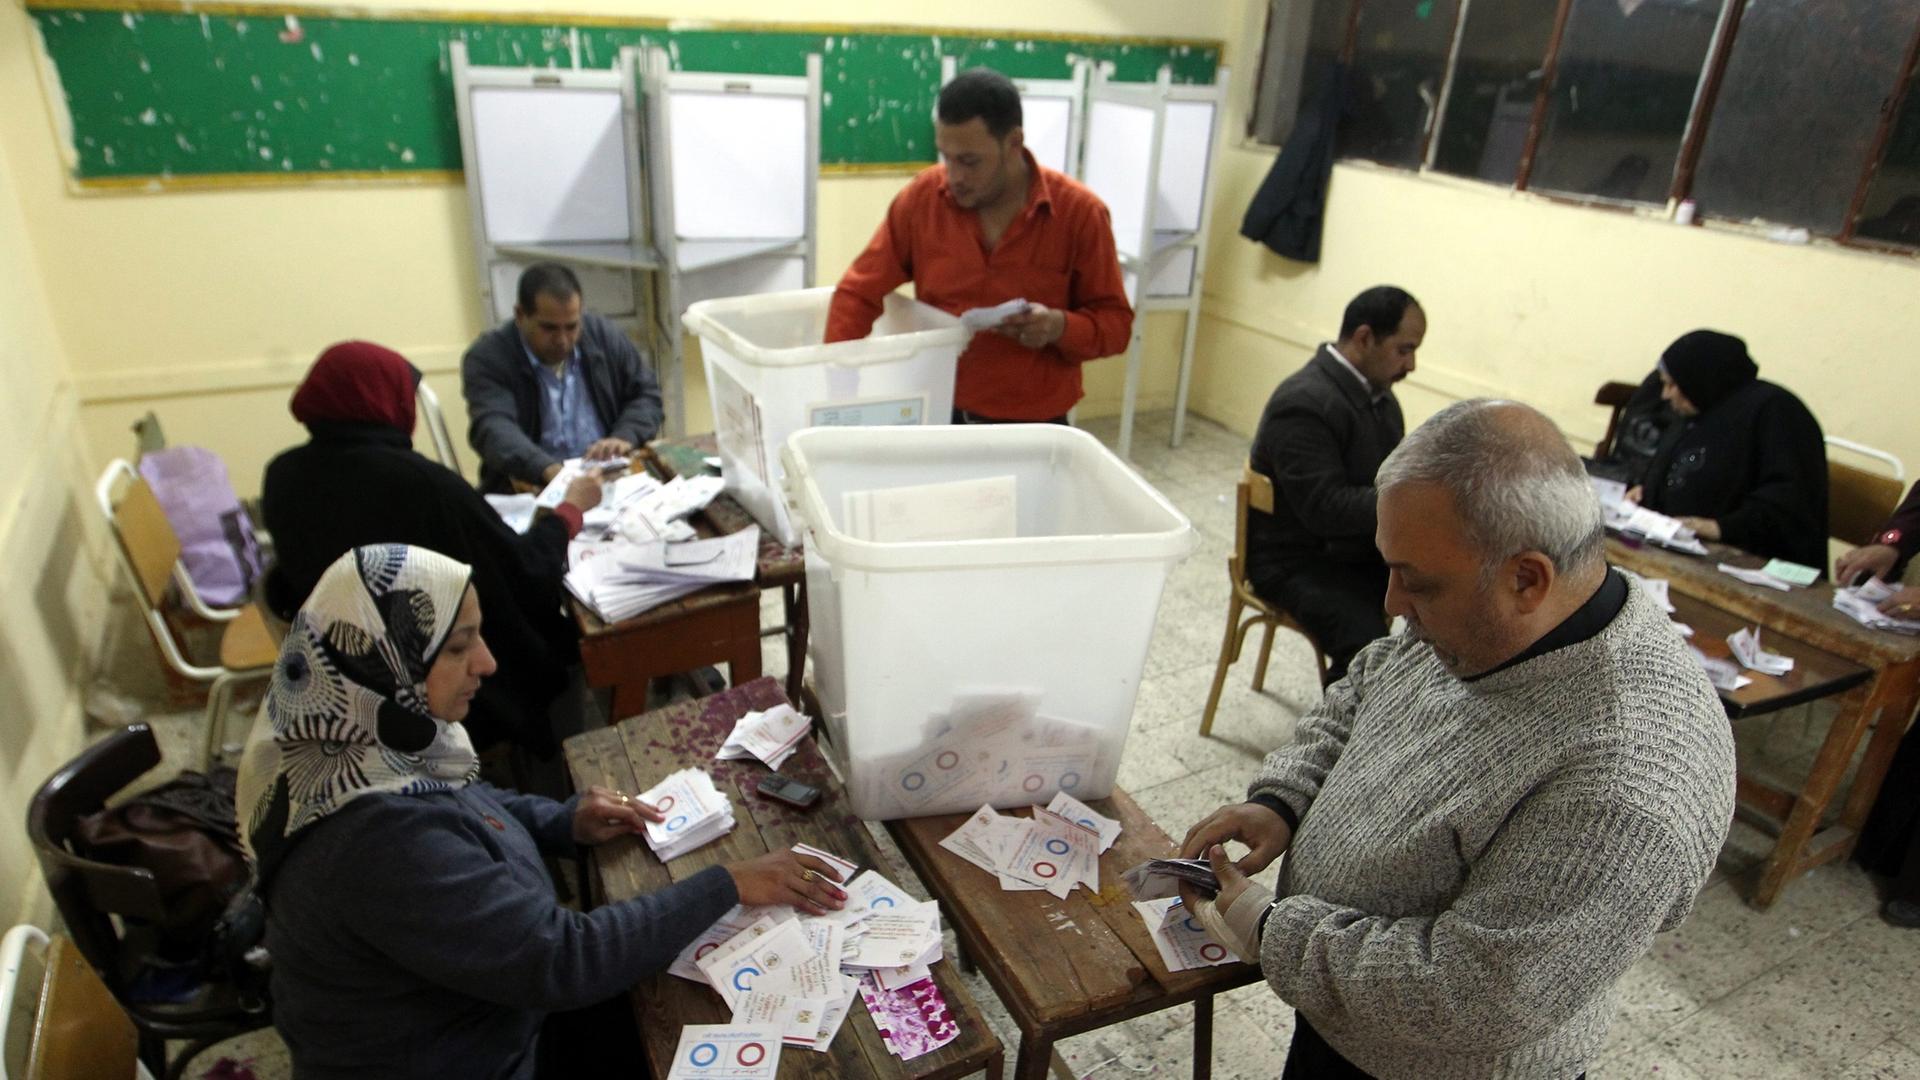 epa04023087 Egyptian election officials count ballots after voting in the second day of a referendum on the new constitution, at a polling station in Helopoils neighborhood in Cairo, Egypt, 15 January 2014. Egypt completed voting in a referendum on a draf